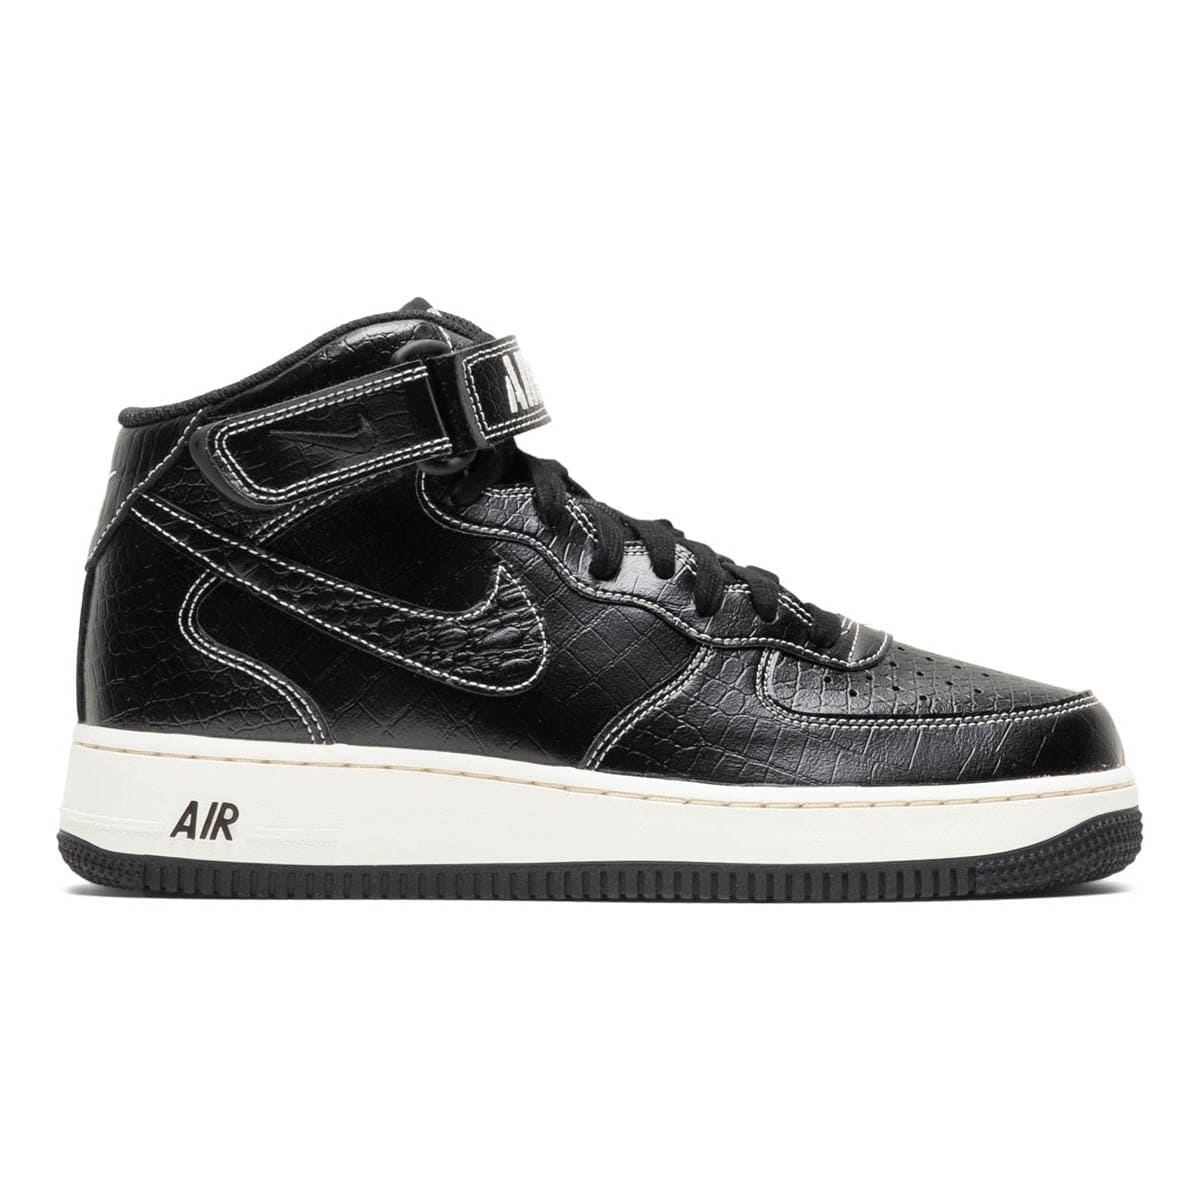 Nike Air Force 1 '07 LX Shoes Spades DS Size 10 Black White